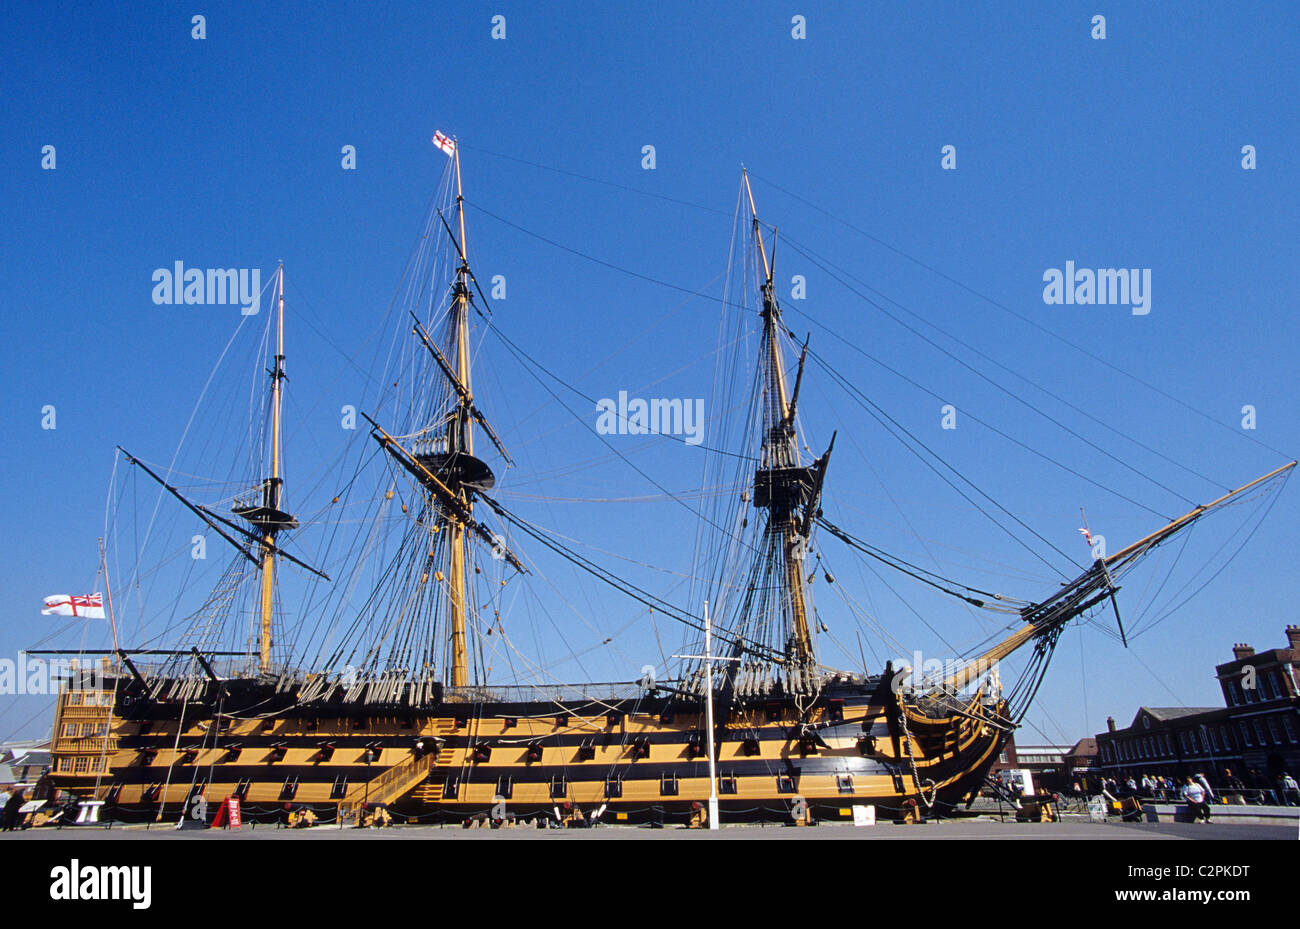 Nelson's flagship HMS Victory at the historic dockyard in Portsmouth, England Stock Photo